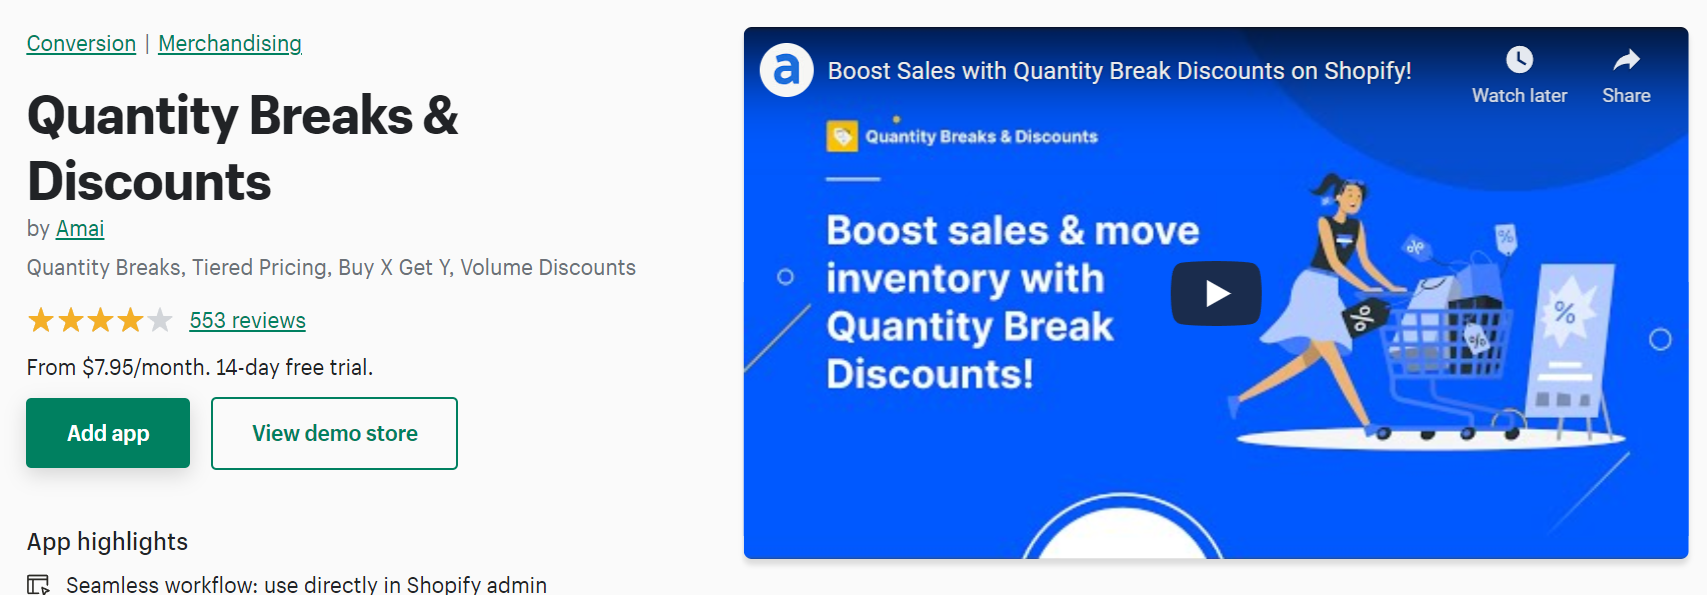 Quantity breaks and discounts